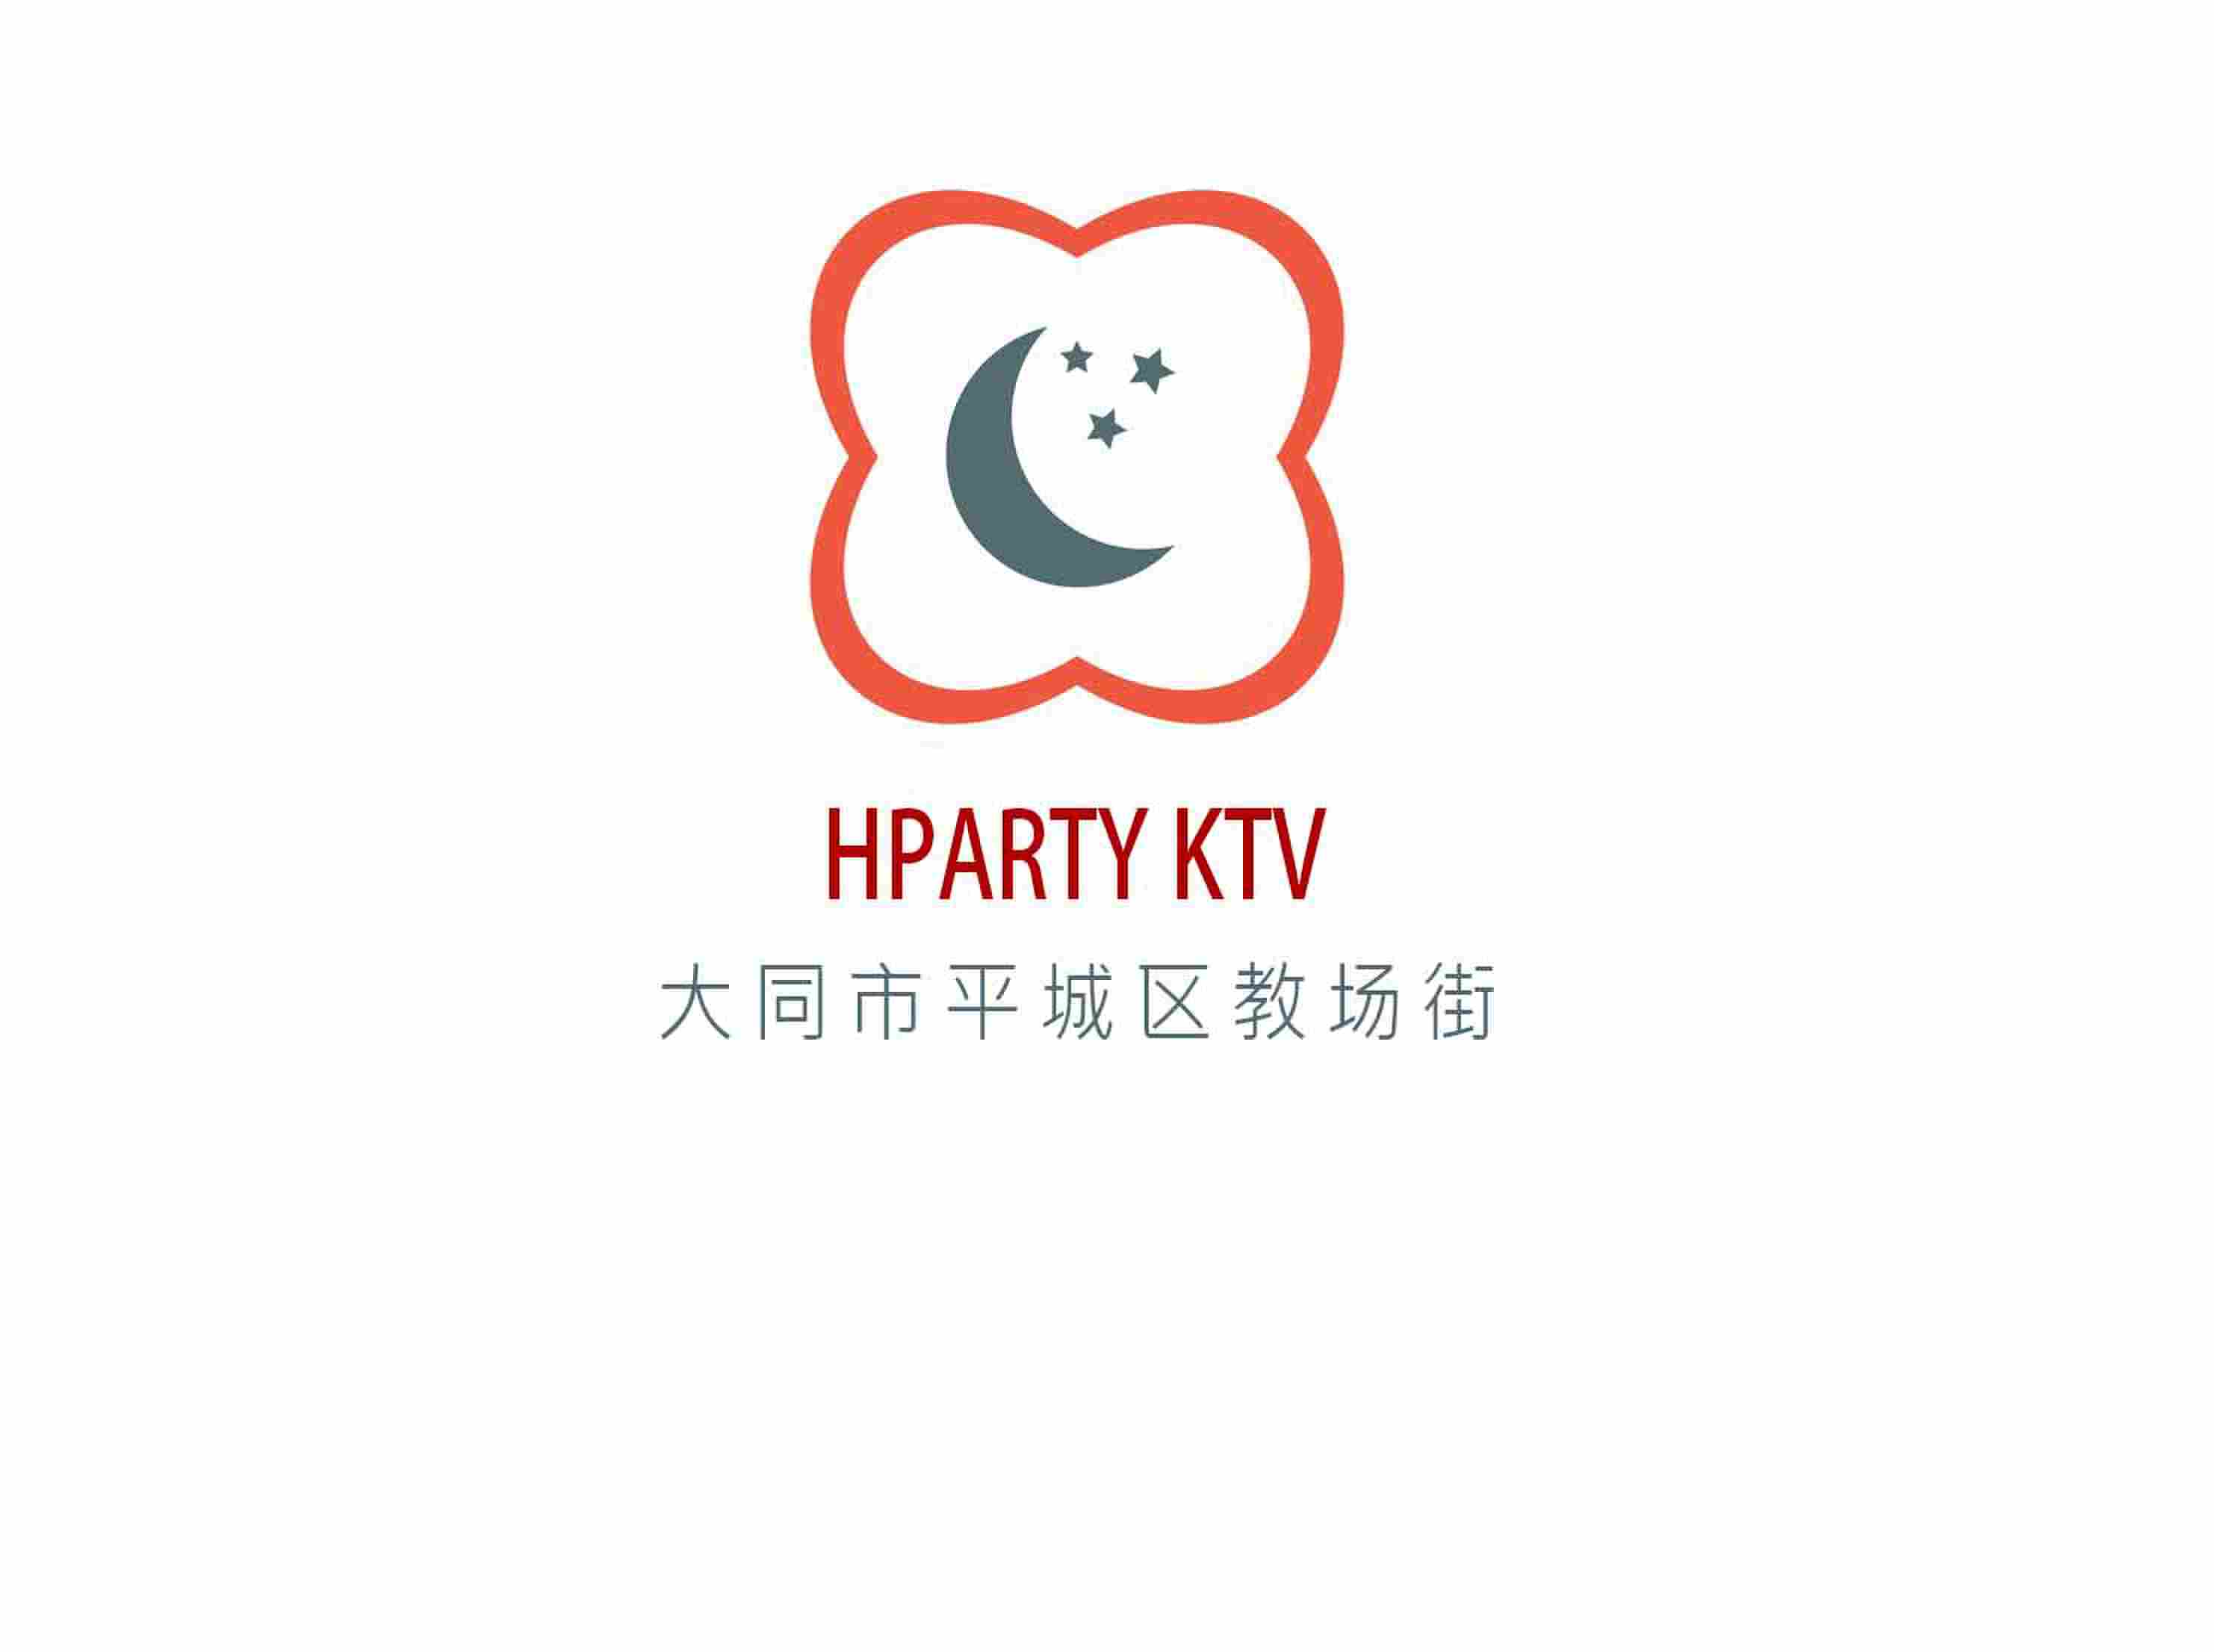 HPARTY KTV